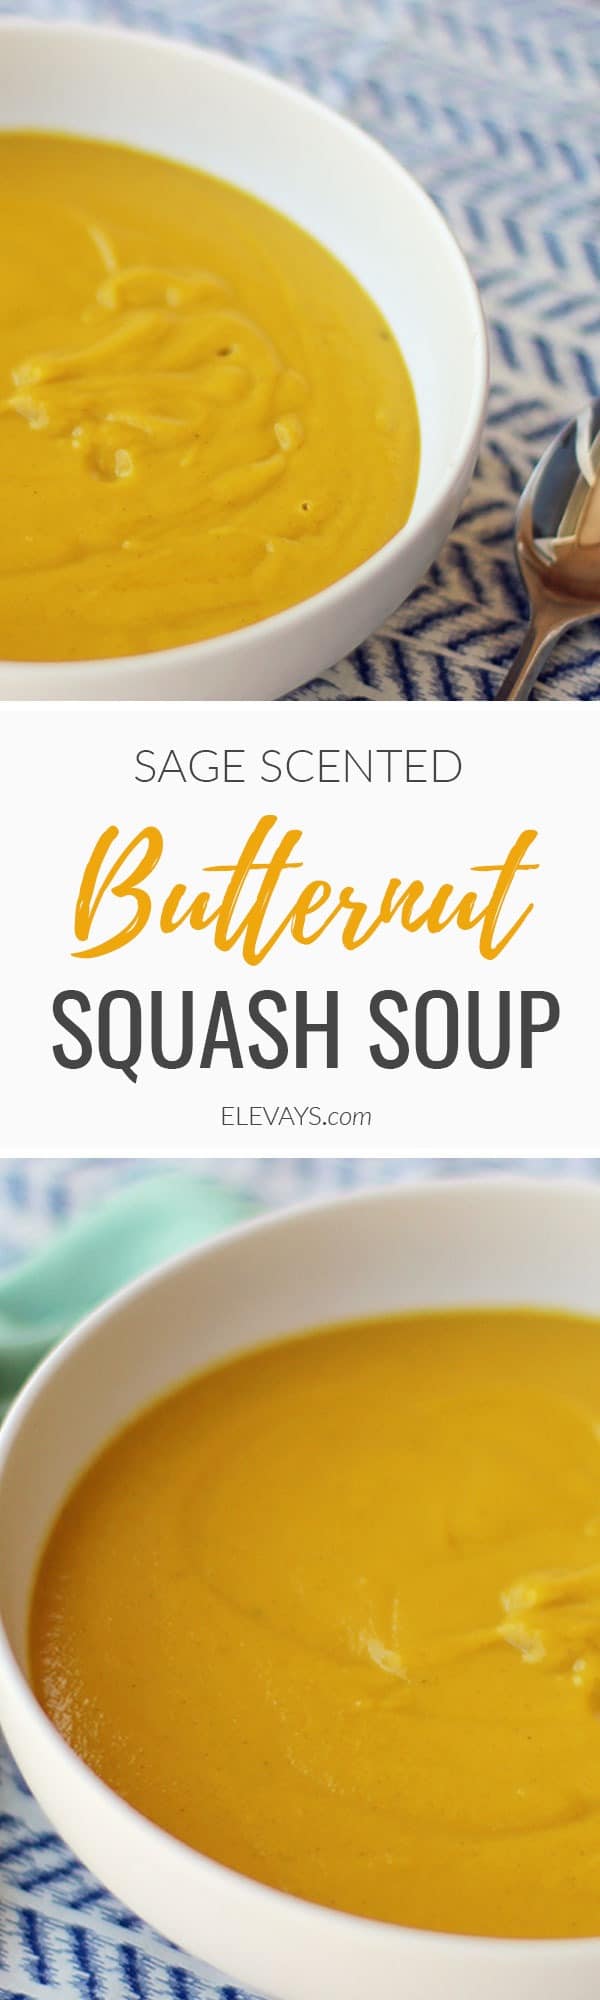 I loooove the produce that’s available in the fall. Pumpkins, squashes, juicy pears and granny smith apples are among a few of my favorites. This butternut squash soup is right up there on the list of my favorite fall recipes. It’s simple, but so delicious. I also like this version of butternut squash soup because it’s seasoned with sage. #fallrecipe #paleo #healthyfood